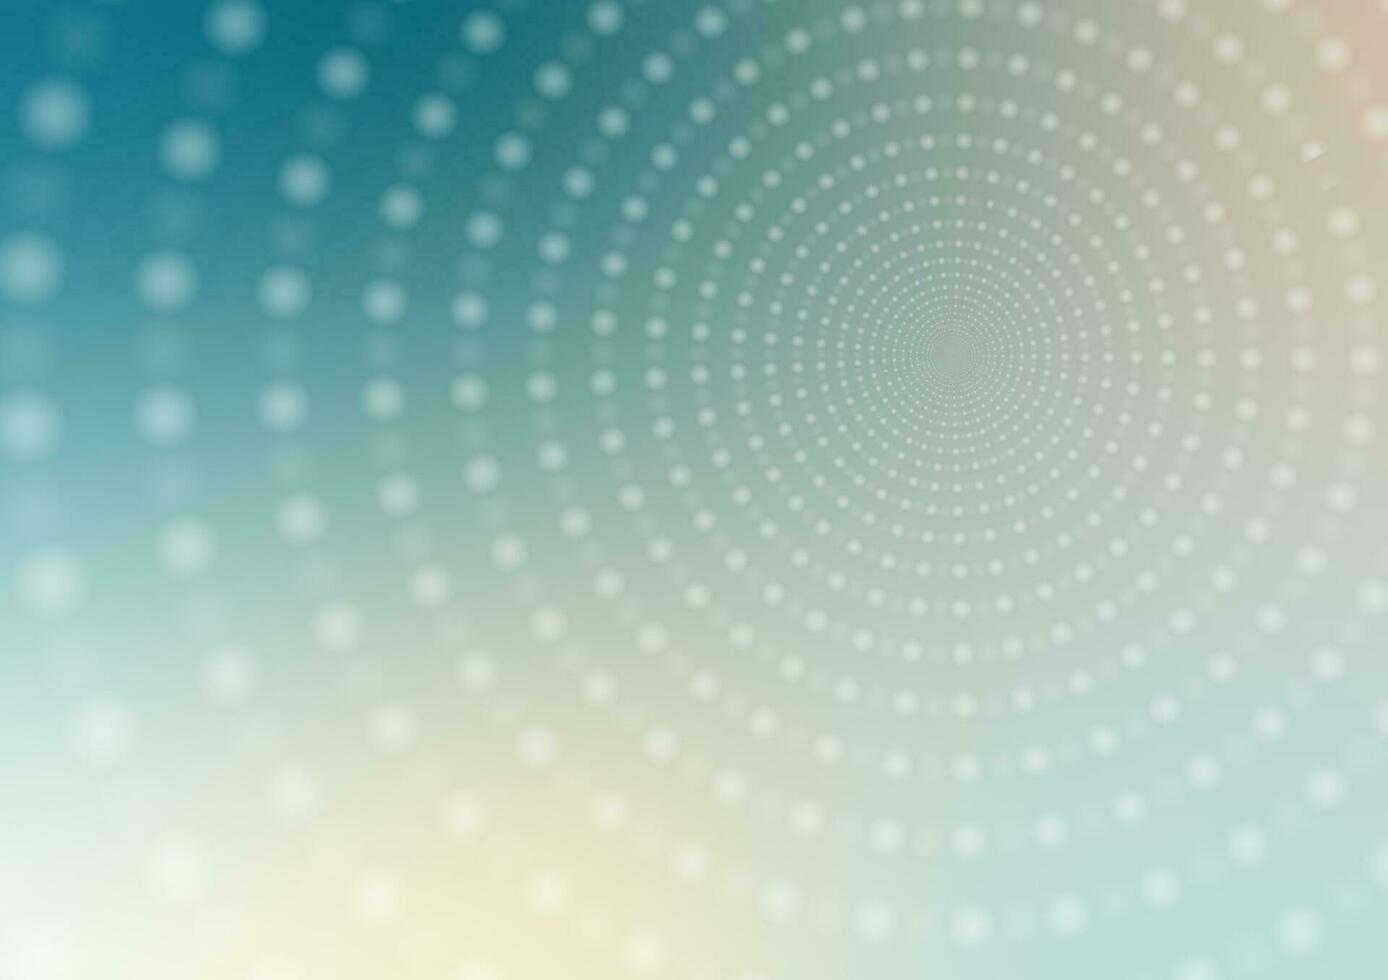 Green deep hold dynamic circle gradient pattern background vector